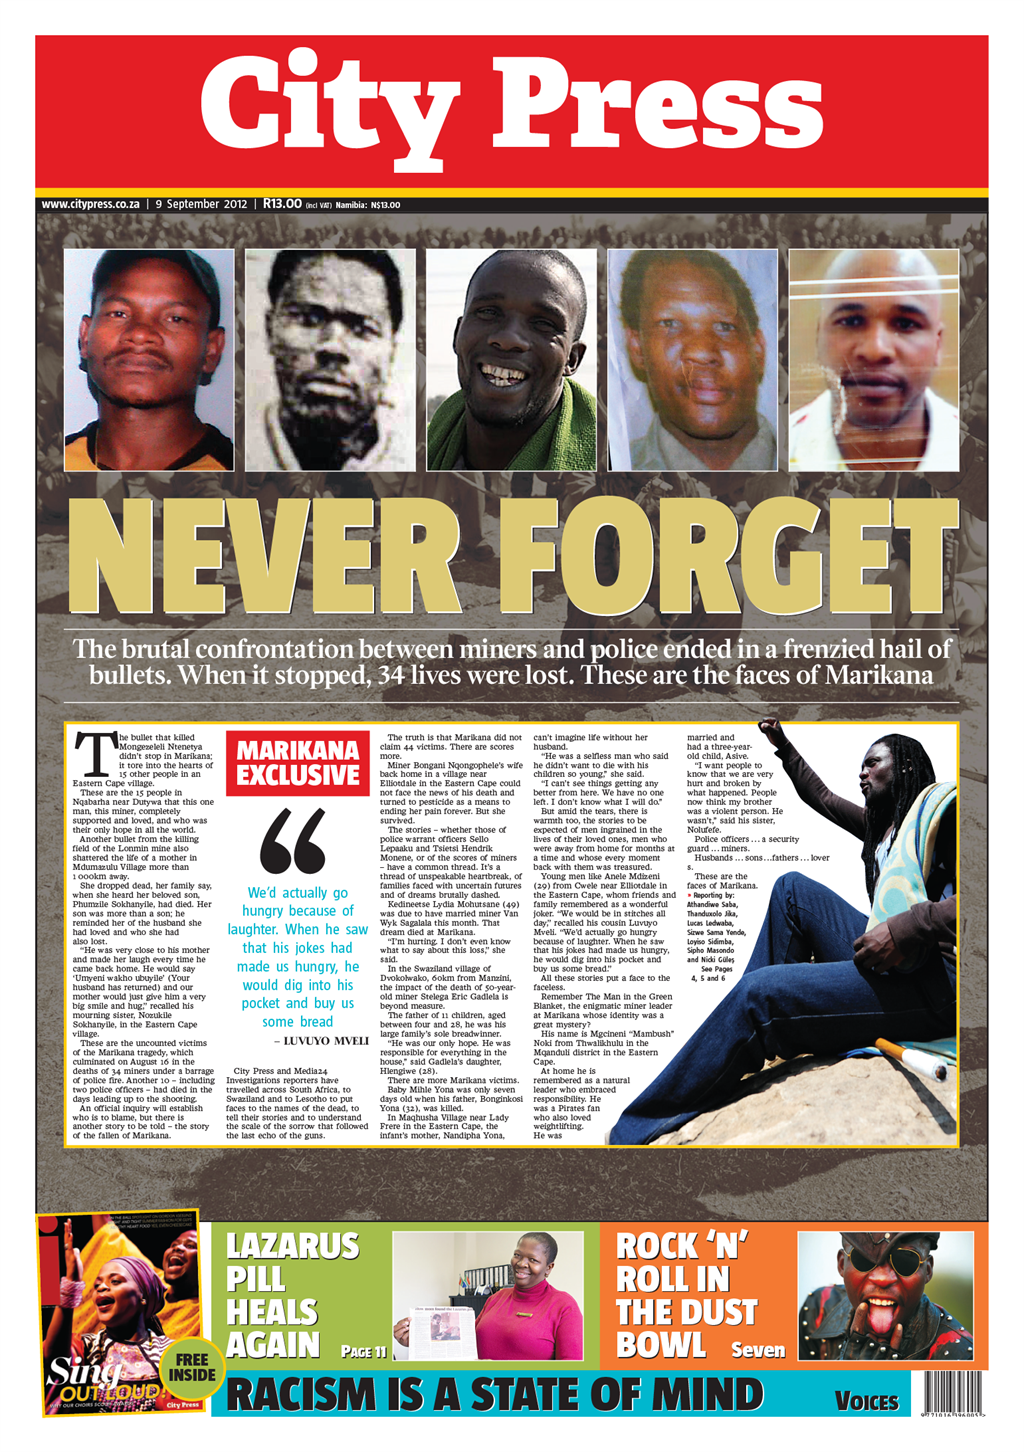 City Press's front page in early September 2012.